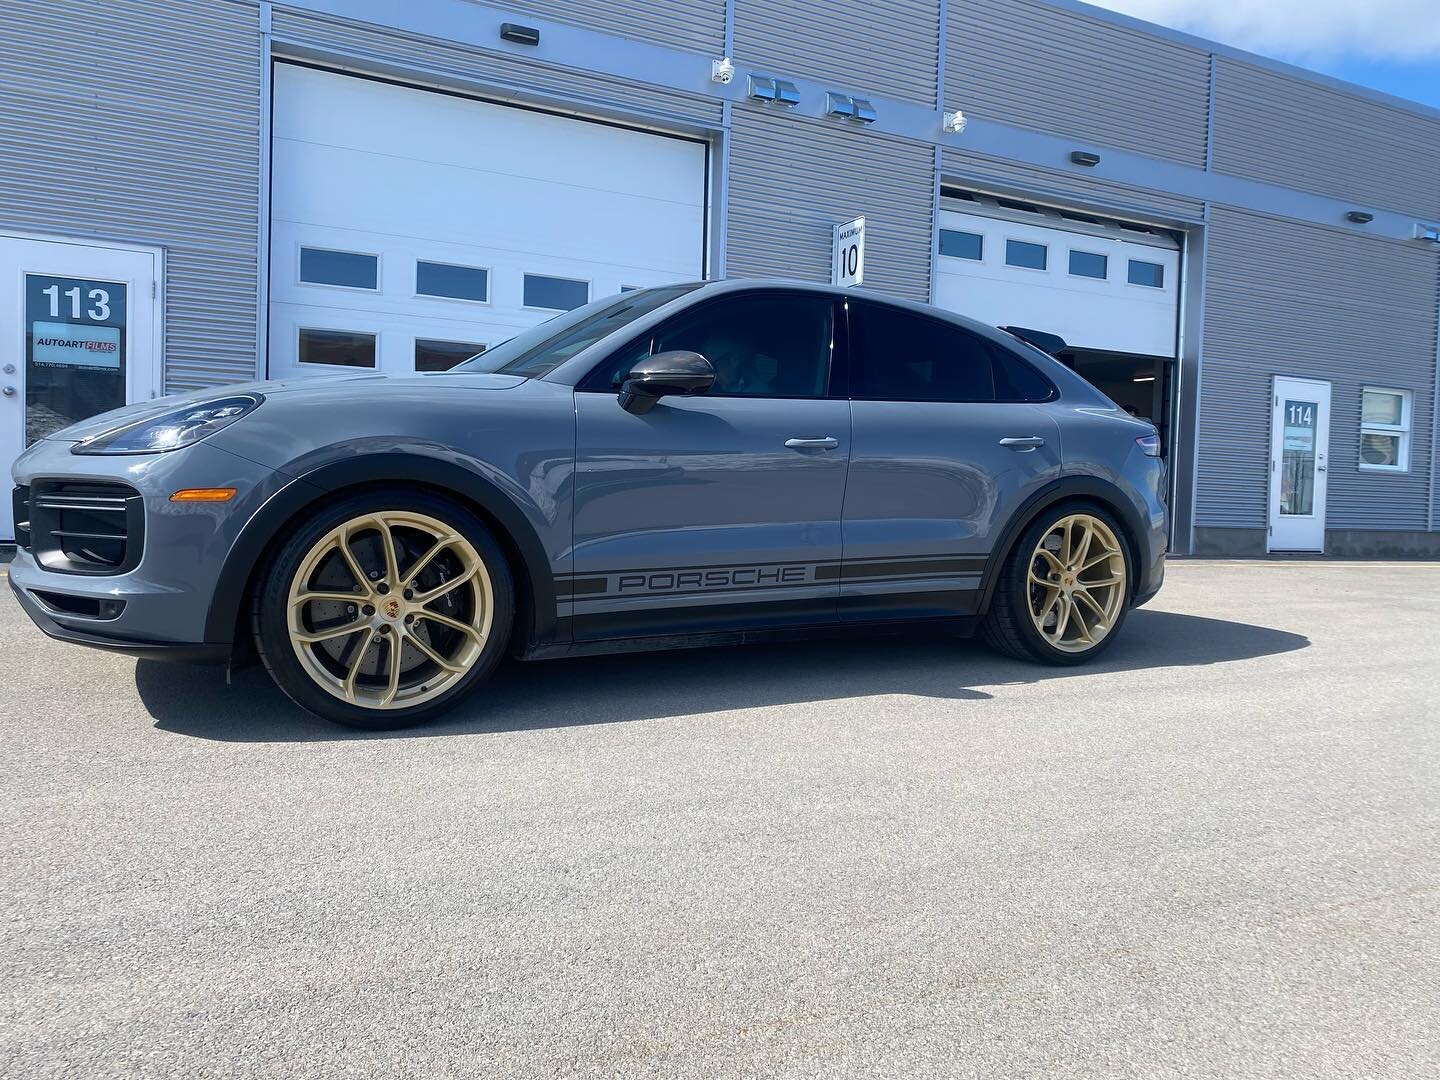 Stealthy and stylish - this Porsche Cayenne Turbo received the ultimate upgrade with our full front PPF kit, ceramic heat control window film, and custom striping for a personalized touch. Keep your ride looking cool and feeling cool. #PorscheCayenne